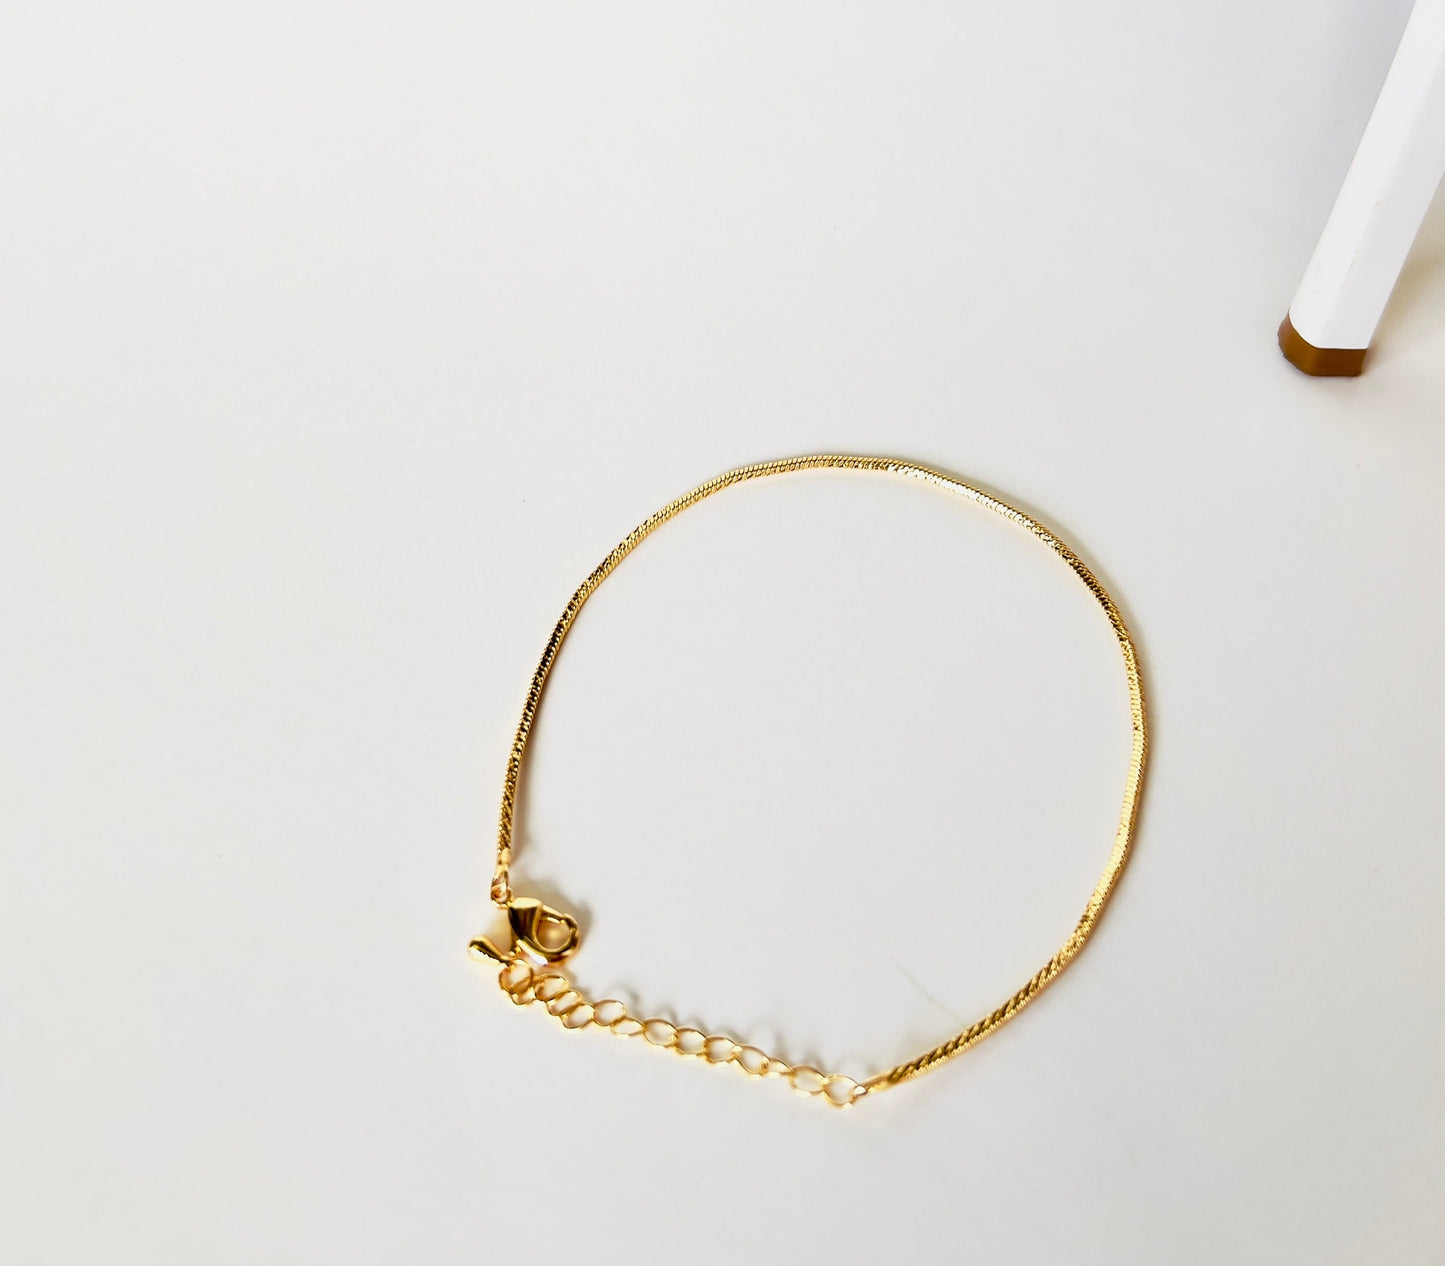 Chic gold plated anklet with snake chain design and lobster clasp - Elegant and comfortable ankle jewelry